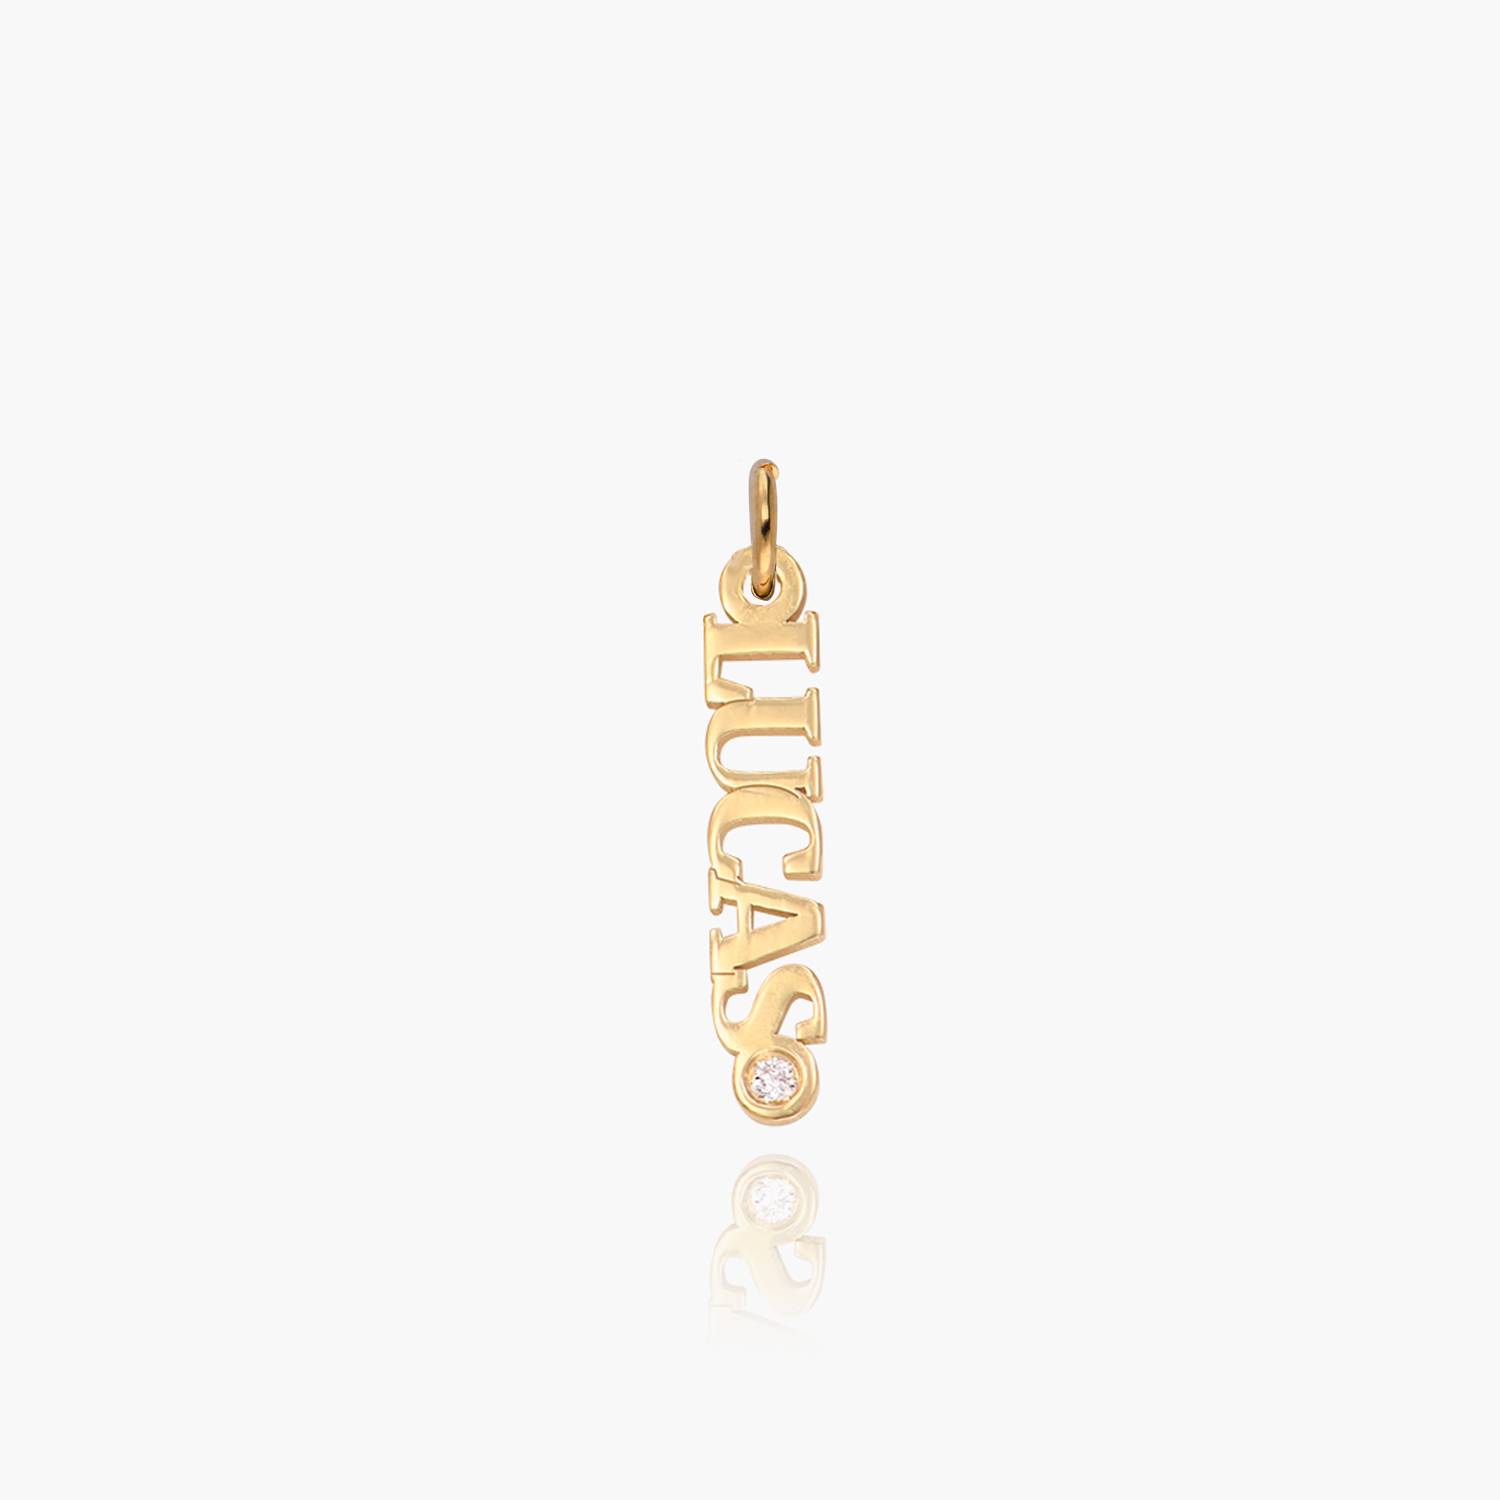 Personalized Name Charm with Diamond - 14k Solid Gold product photo